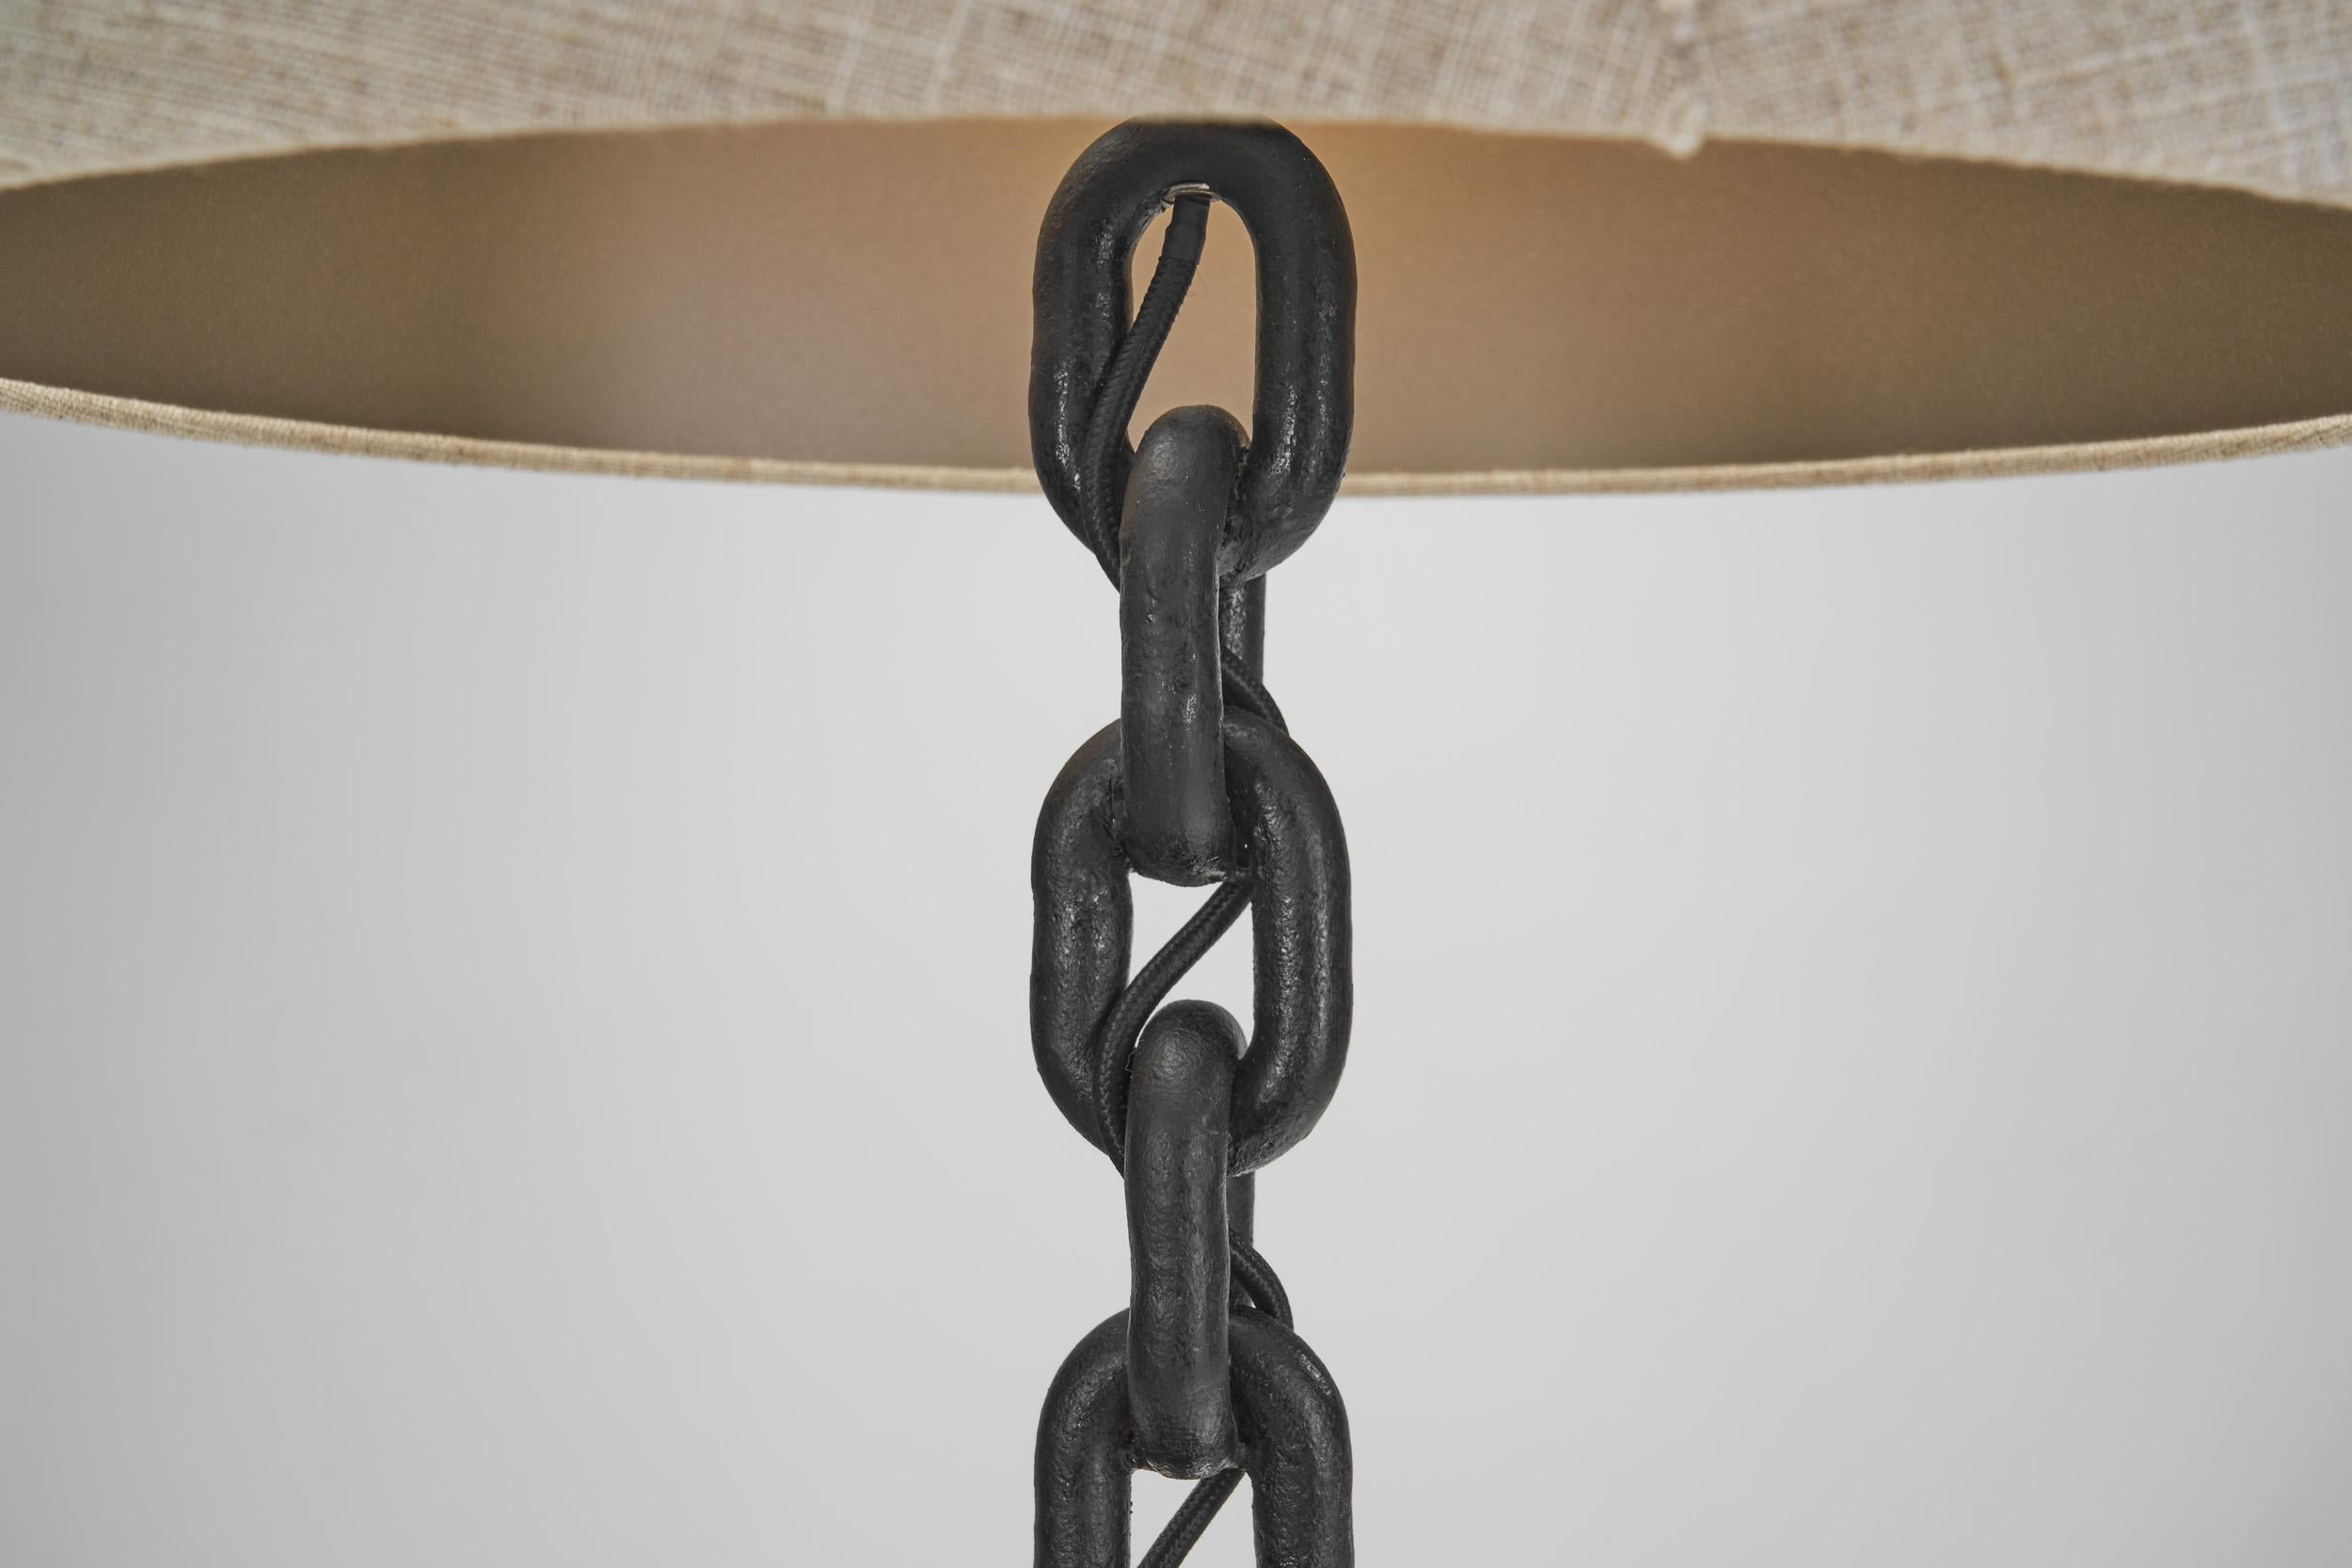 Wrought Iron Table Lamp with Chain Links, France 1960s For Sale 7